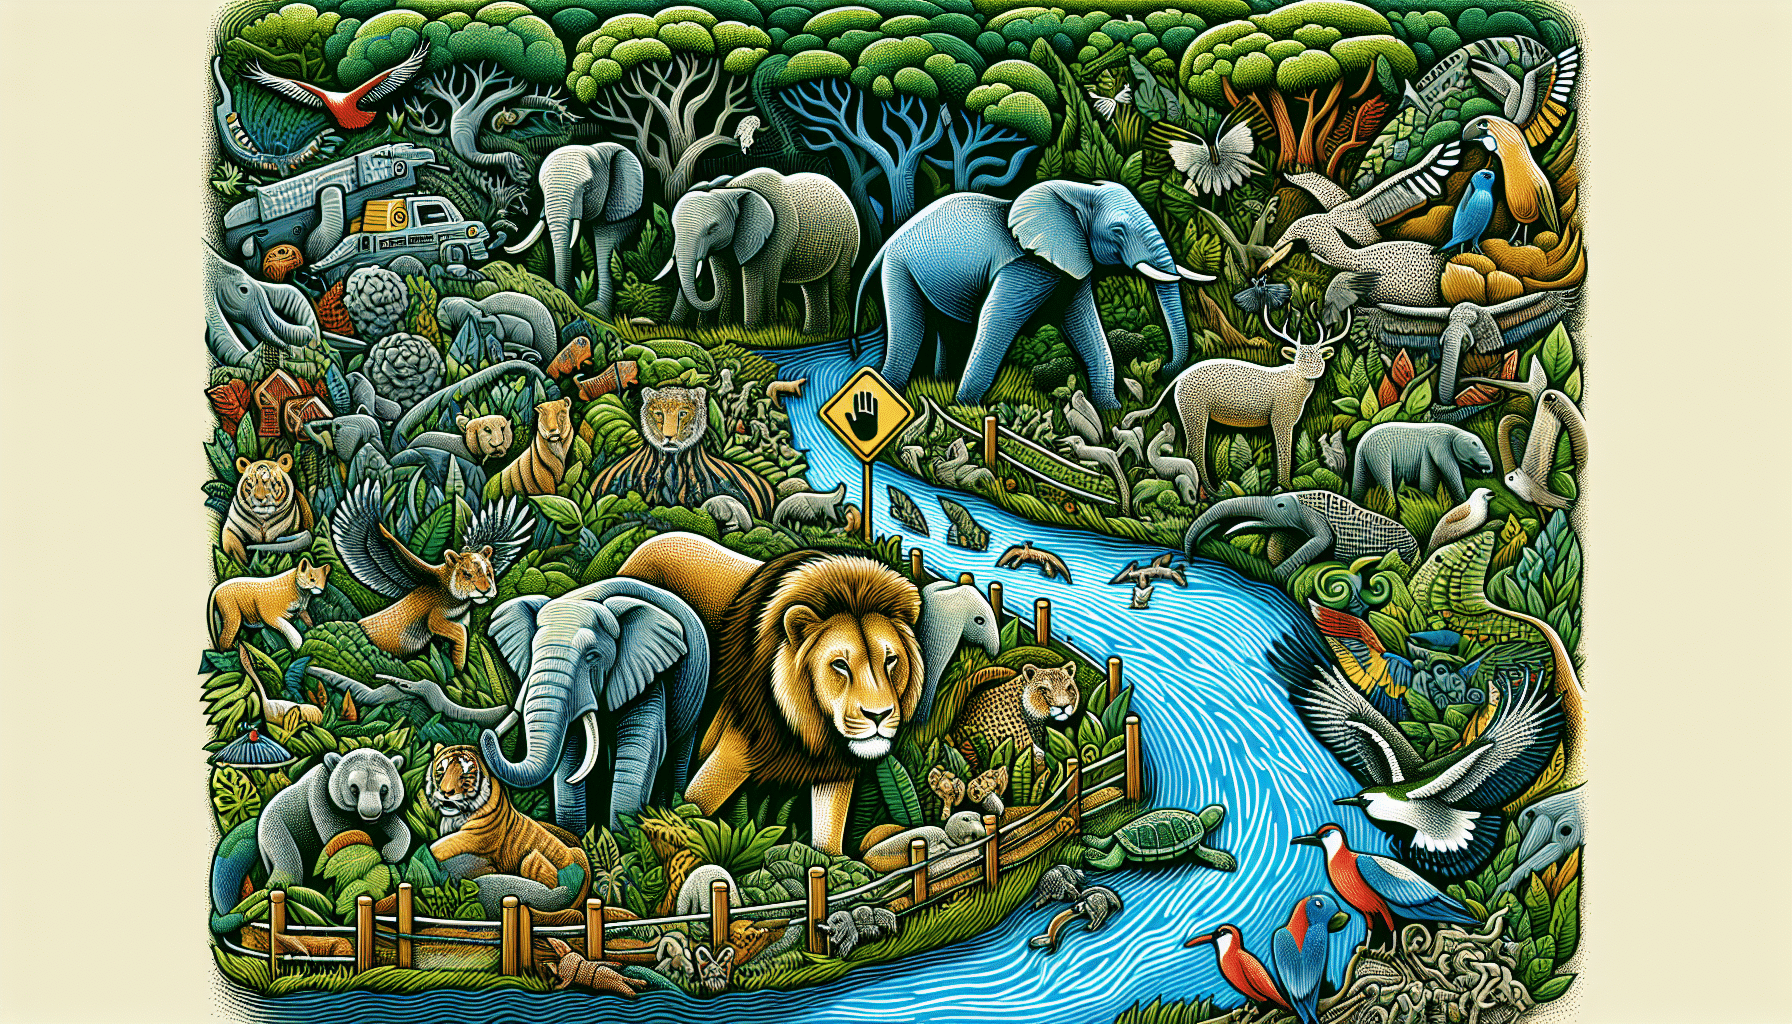 An illustrative image depicting the essence of animal conservation. An assortment of wild animals such as elephants, lions, and birds coexist in a thriving, diversified forest environment. The imagery prominently features rich biodiversity, with lush vegetation and a clean, flowing river indicating a healthy ecosystem. Symbols representing cautionary signs, like a barrier or an emblem of a hand guarding the fauna, hint at measures taken to protect these animals. Importantly, no human or brand names are depicted, and no text appears either on objects or within the image itself.